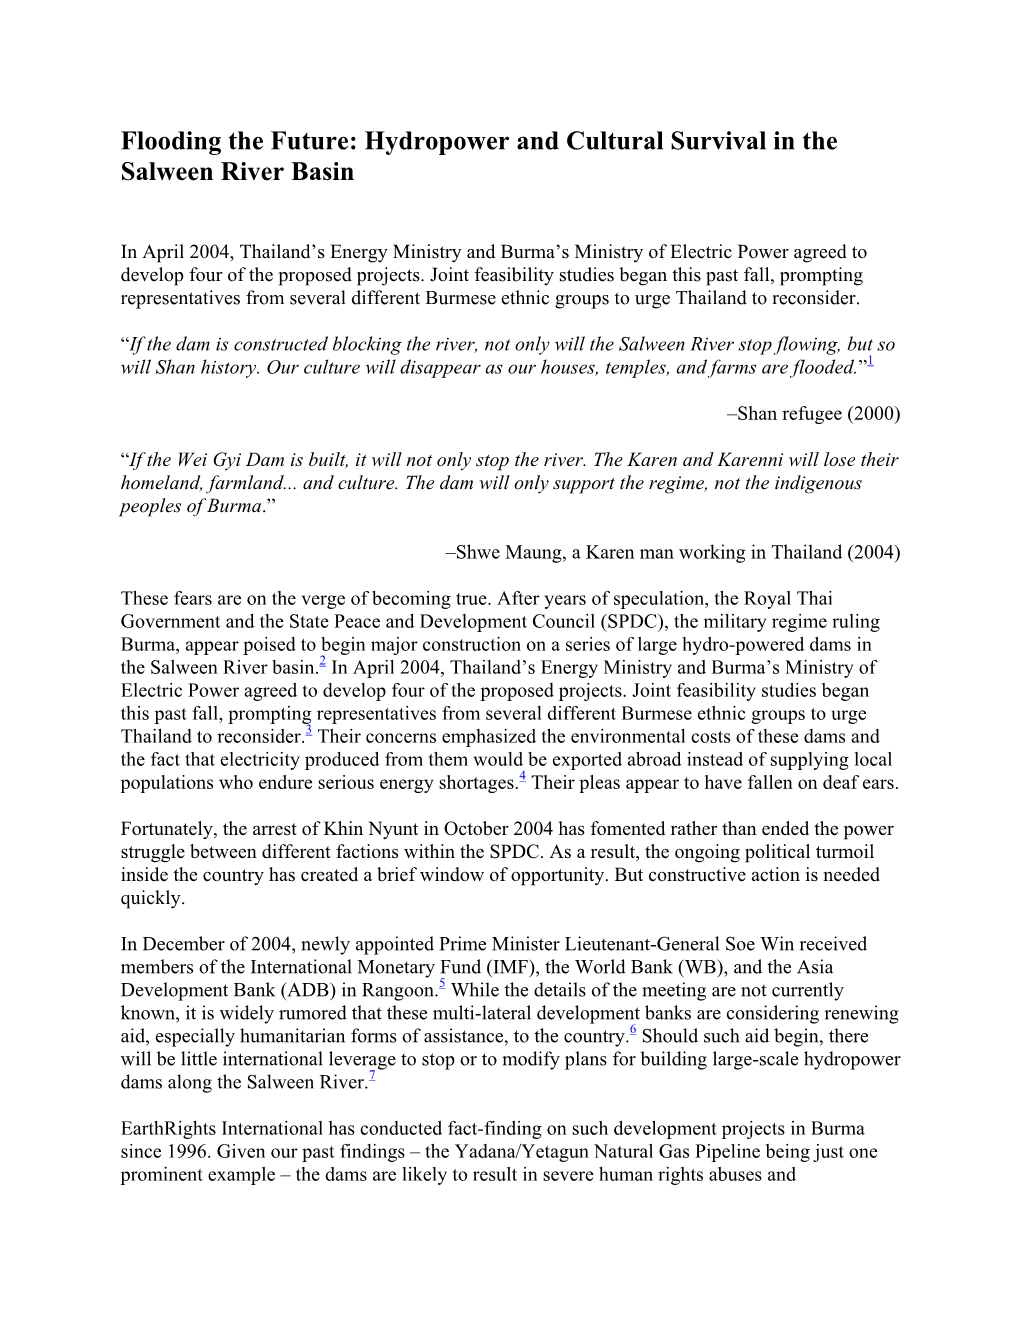 Flooding the Future: Hydropower and Cultural Survival in the Salween River Basin